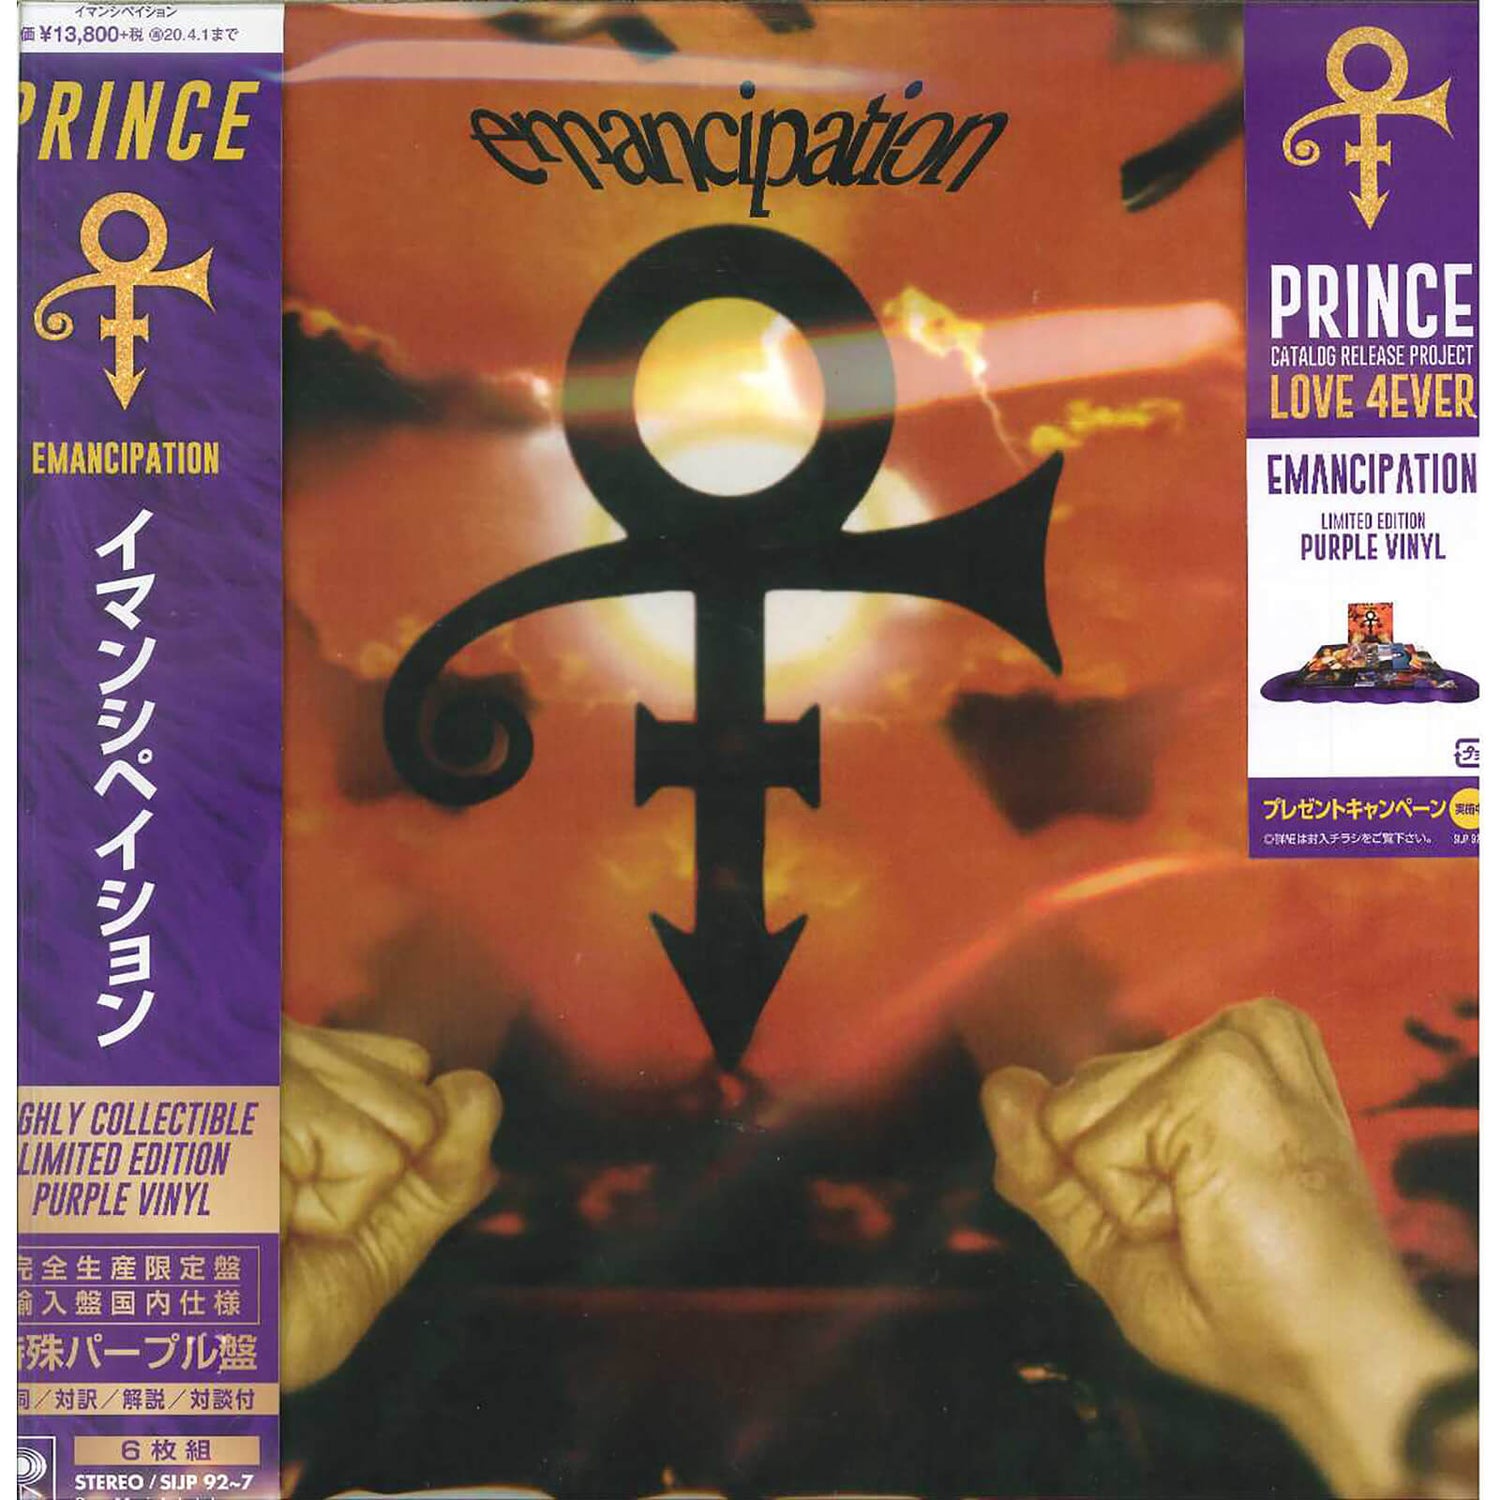 The Artist (Formally Known As Prince) - Emancipation Vinyl Set Japanese Edition